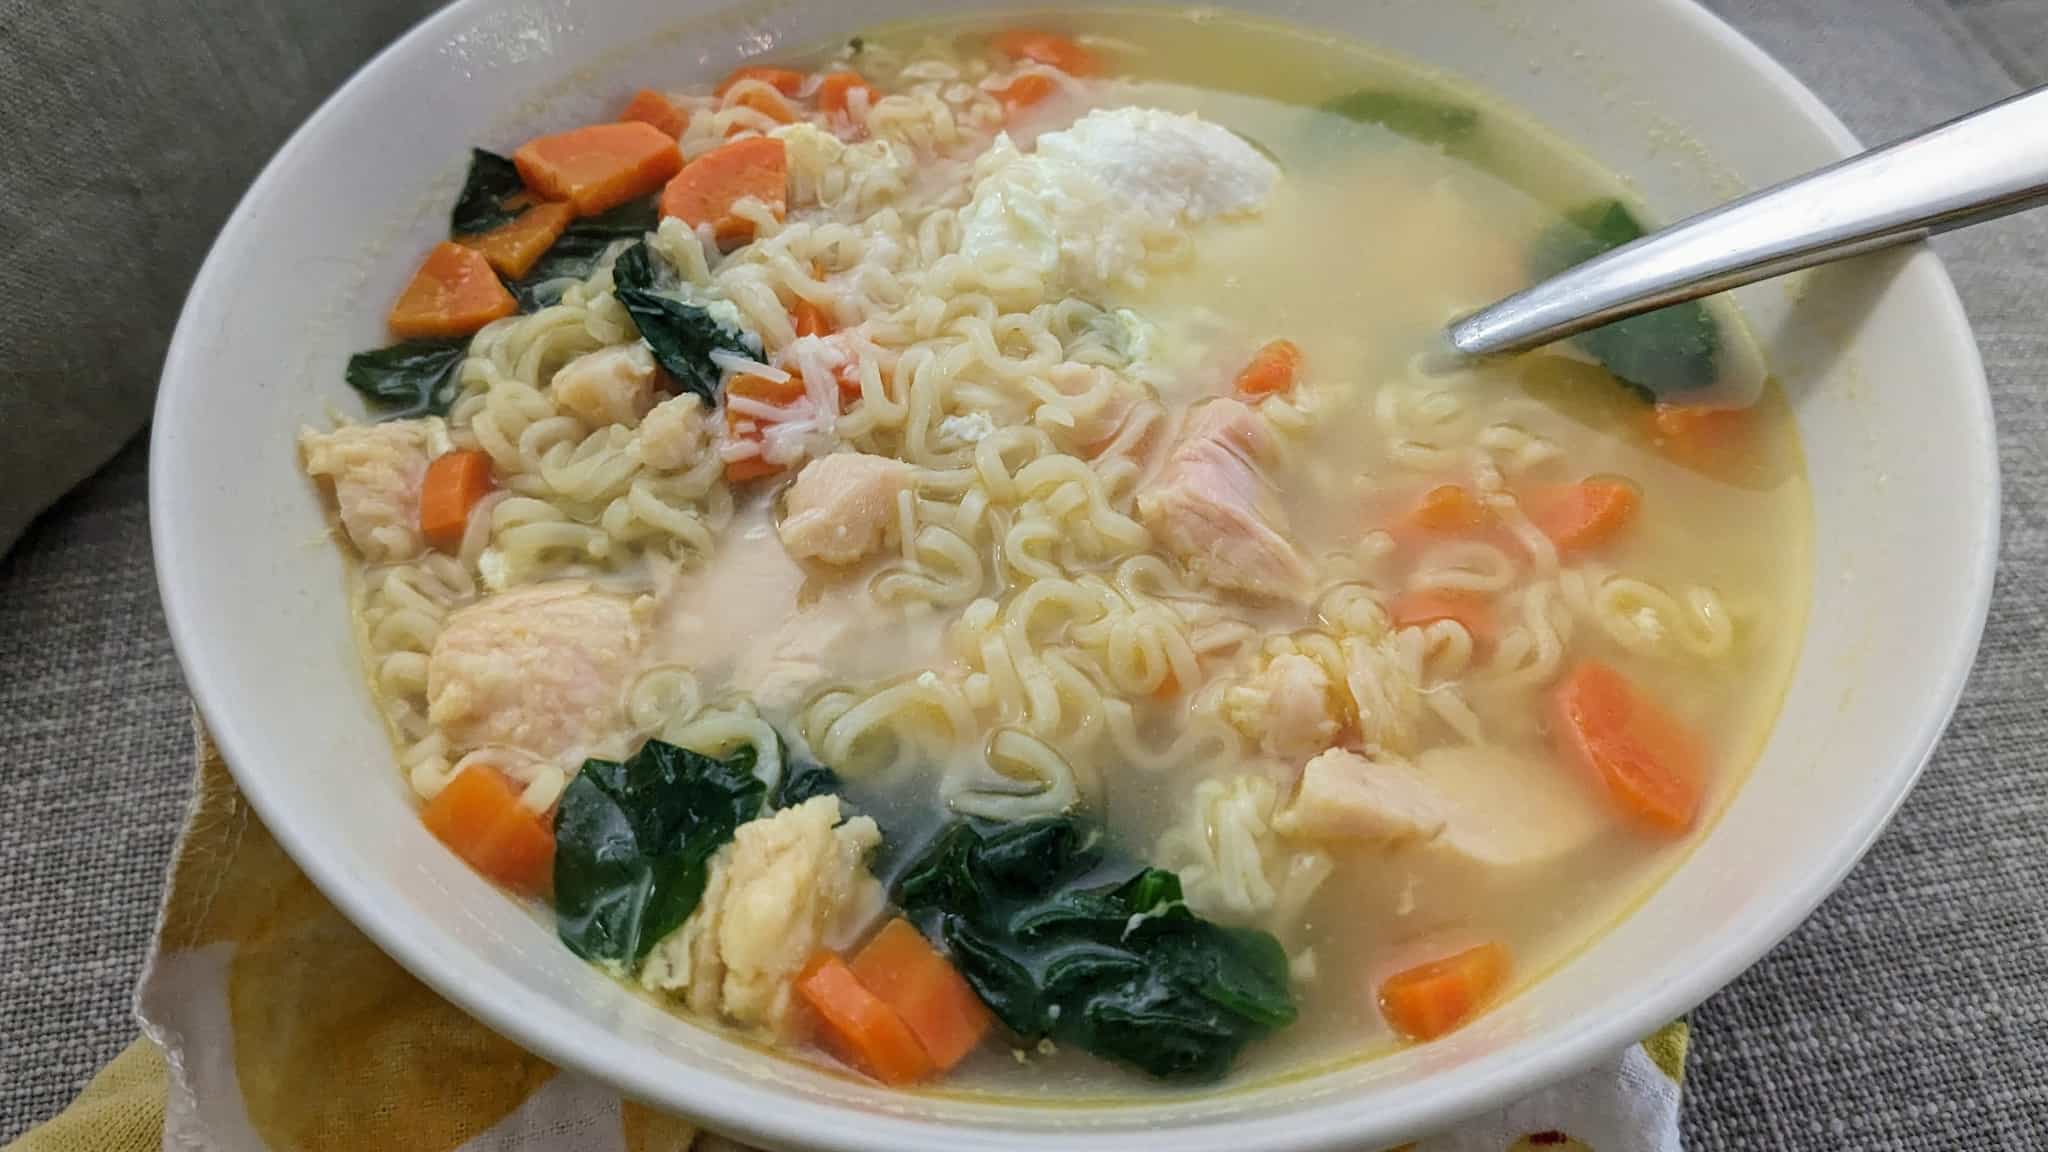 Bowl of noodles, spinach, carrots, chicken, and egg.